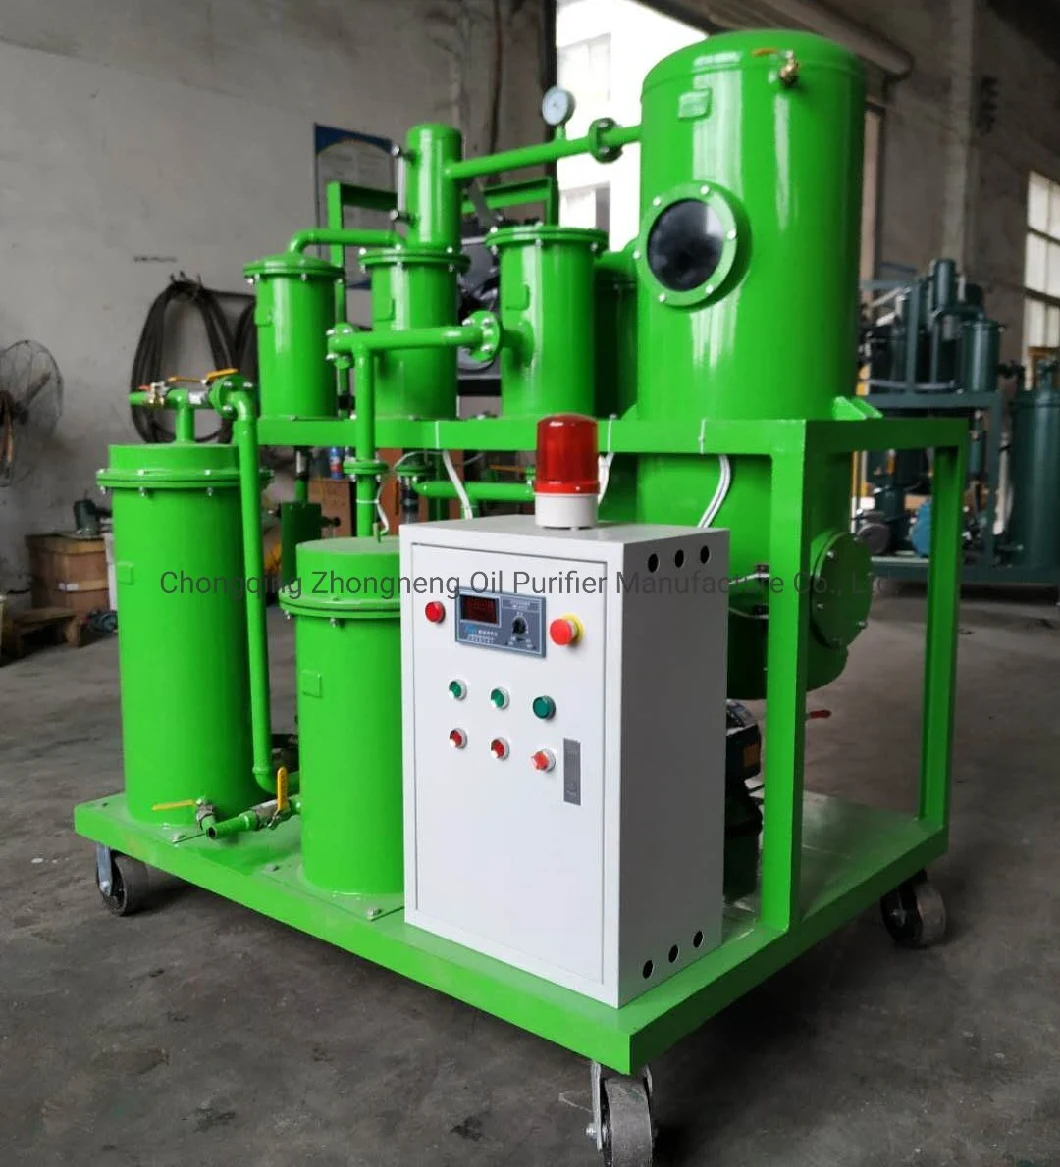 High Effect Hydraulic Oil Filtration Machine From China